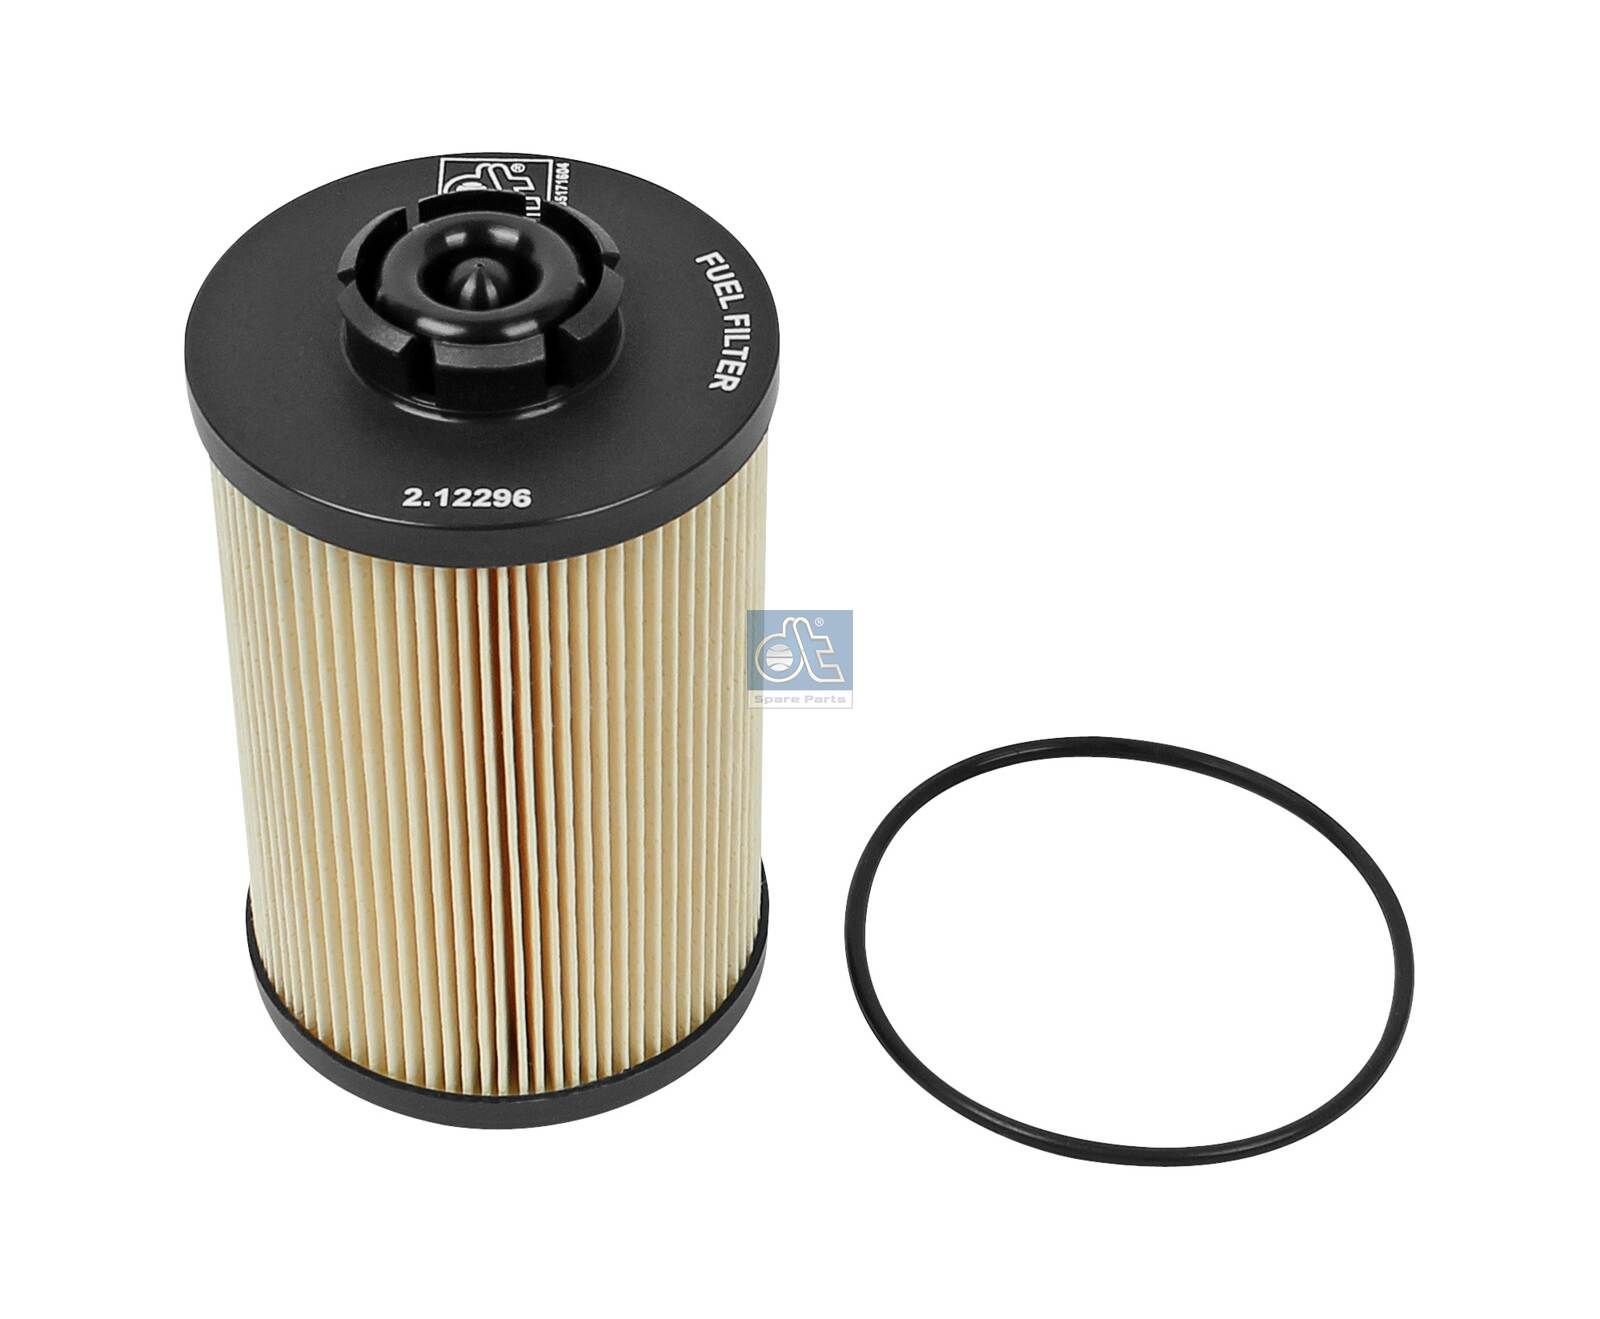 PU 1058X DT Spare Parts 2.12296 Fuel filter F 731200060020